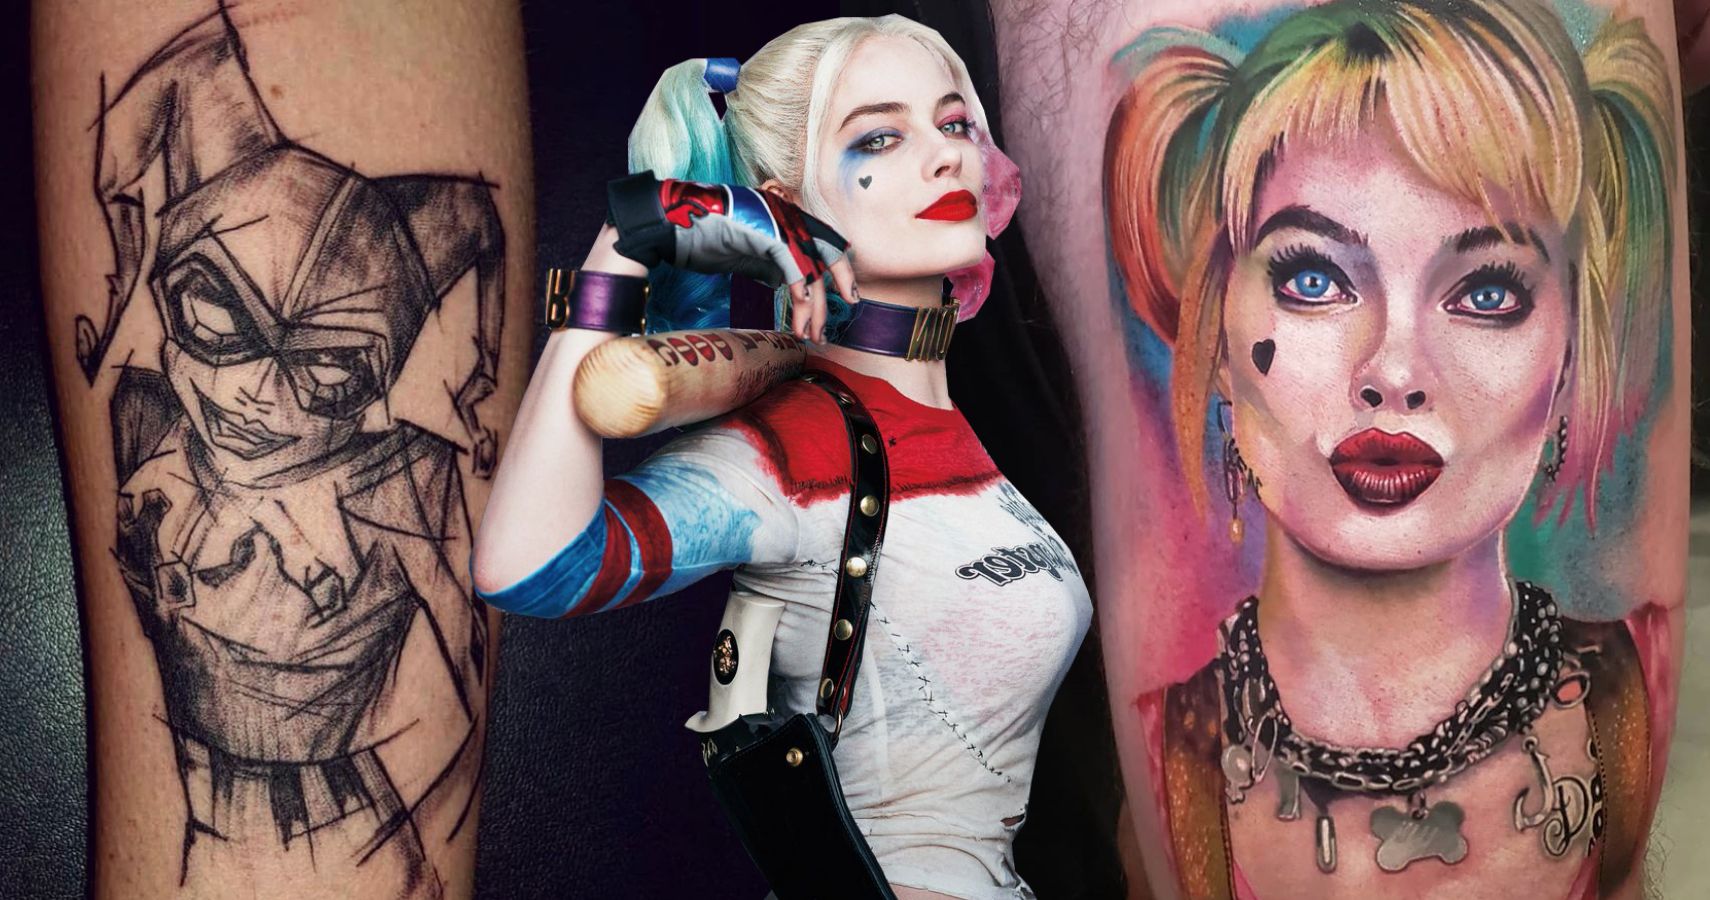 TASROI 5 Sheets Harley Quinn Tattoo Stickers For Women Men Adults Fake  Joker Harley Quinn Tattoos Suicide Squad Birds of Prey Temporary Tattoos  Halloween Face Makeup Harley Quinn Costume Accessories